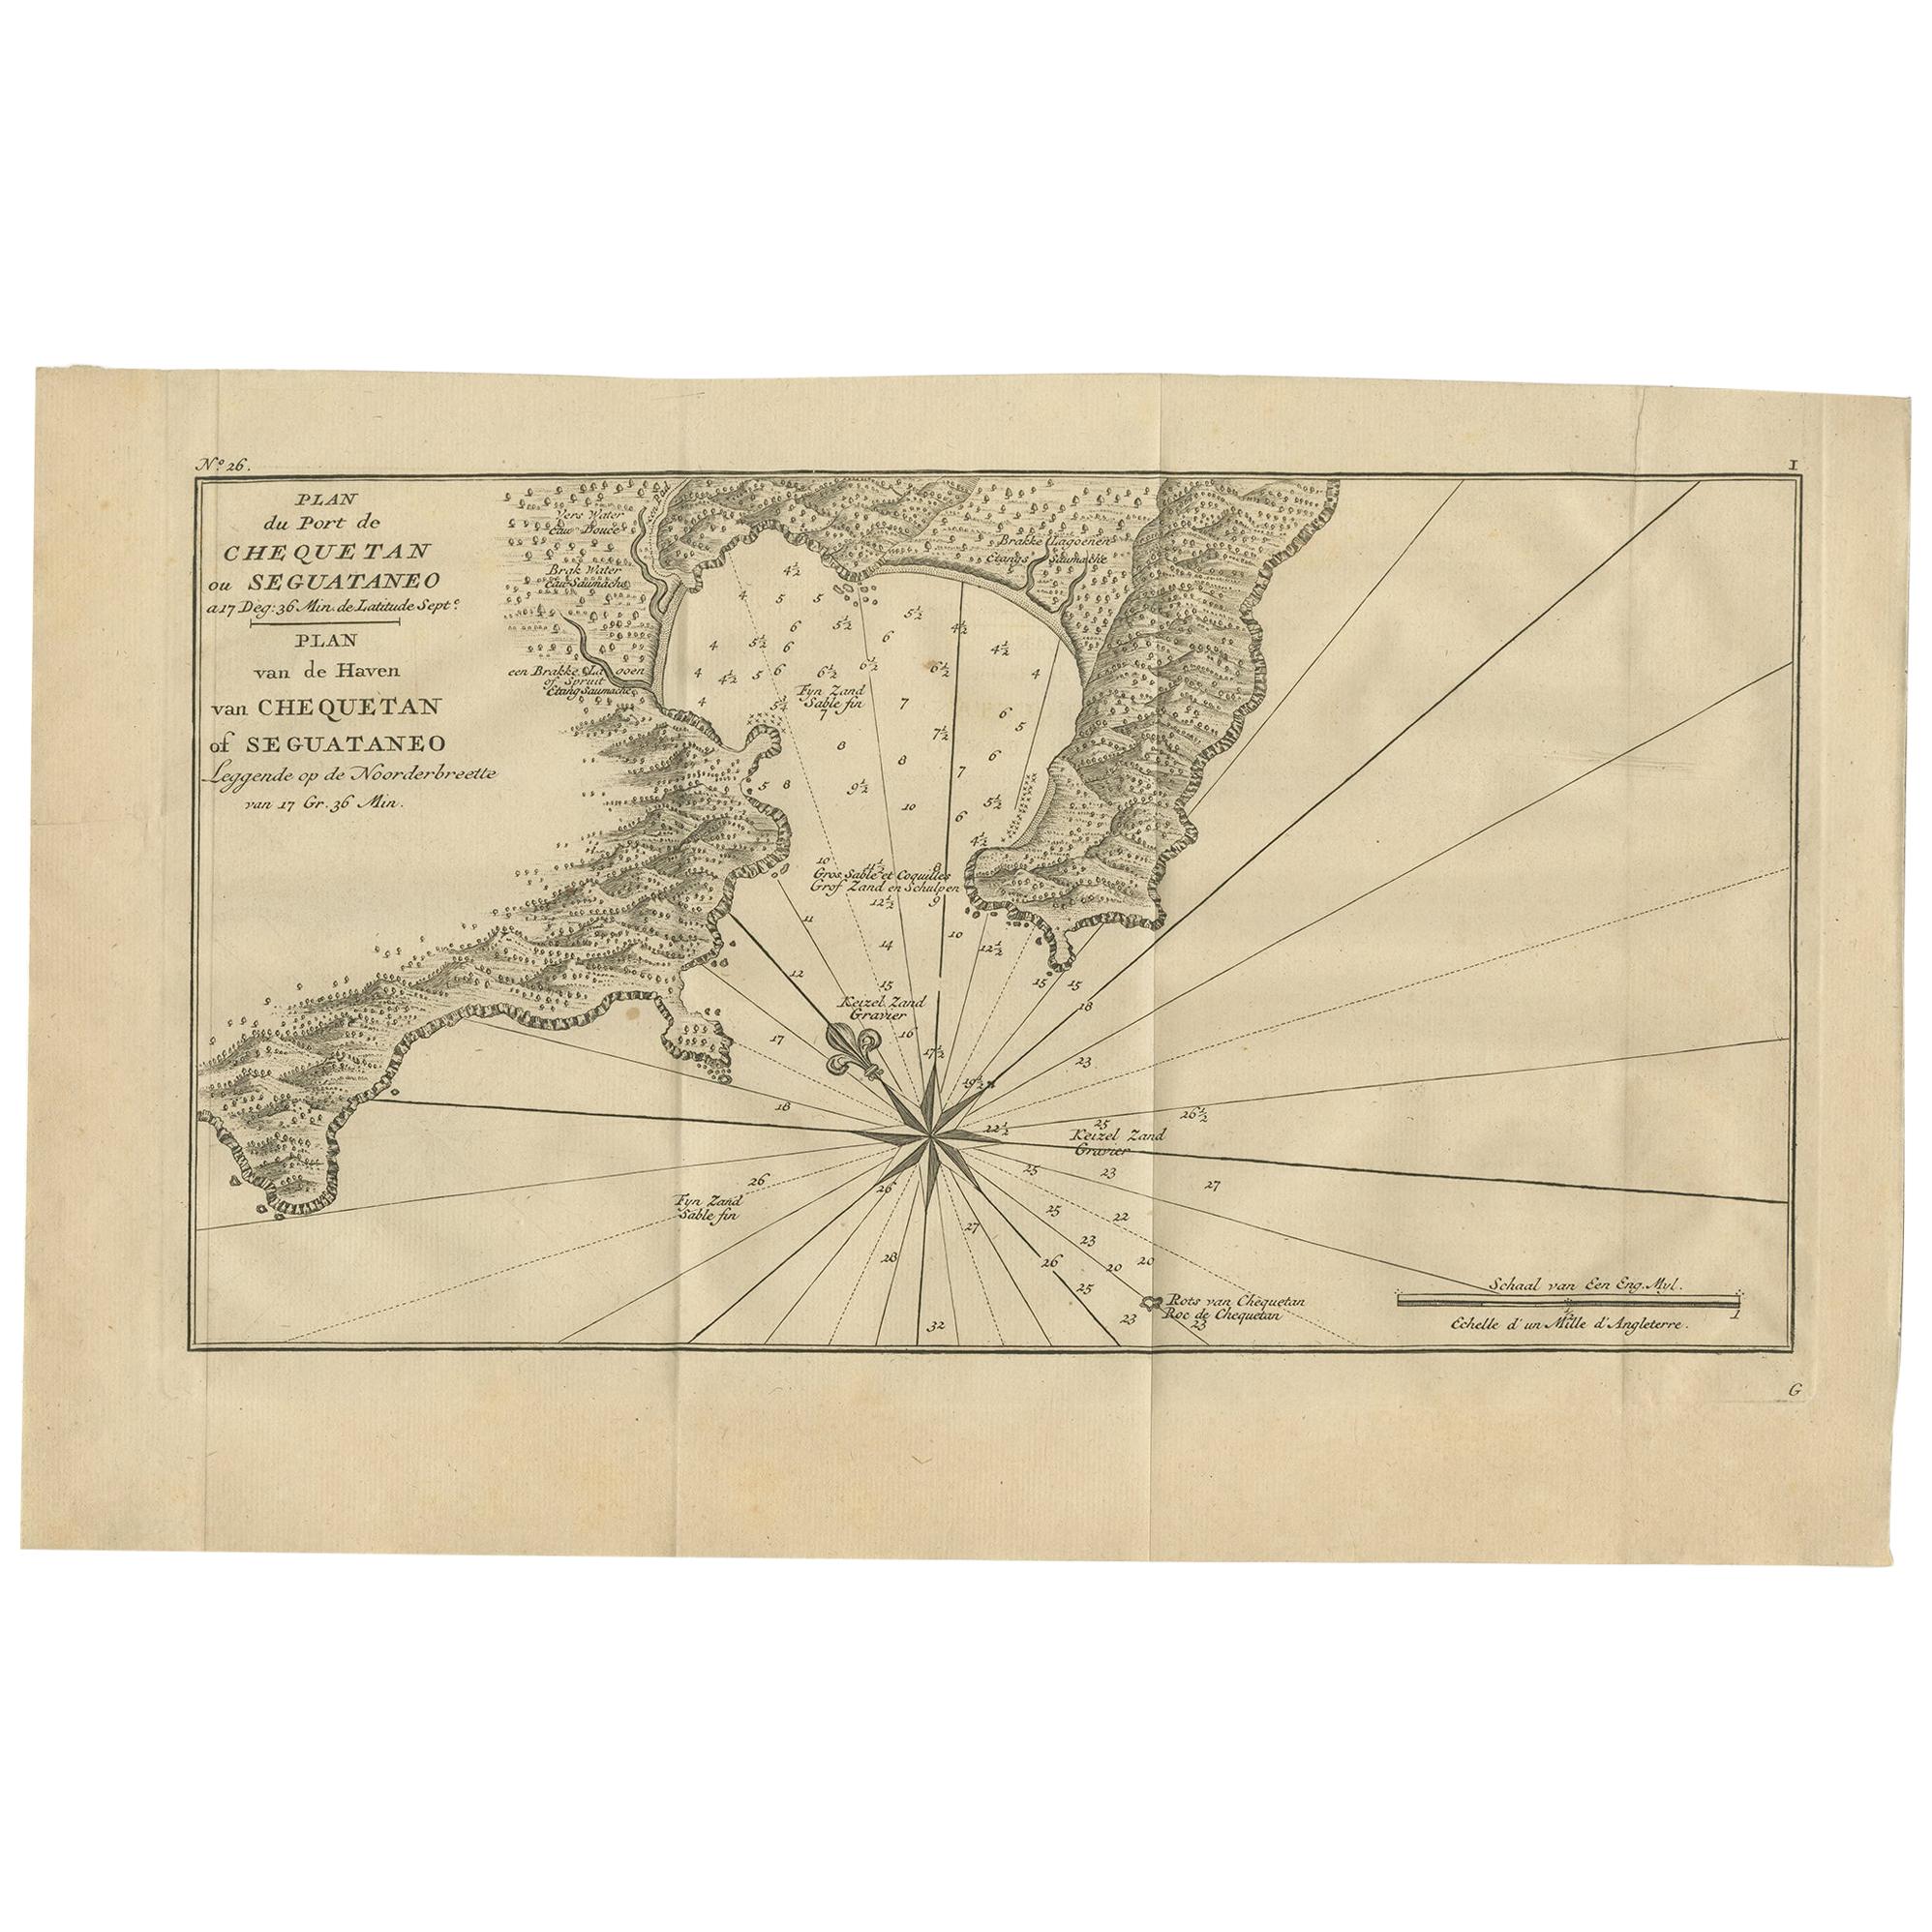 Antique Map of the Port of Zihuatanejo by Anson '1749'